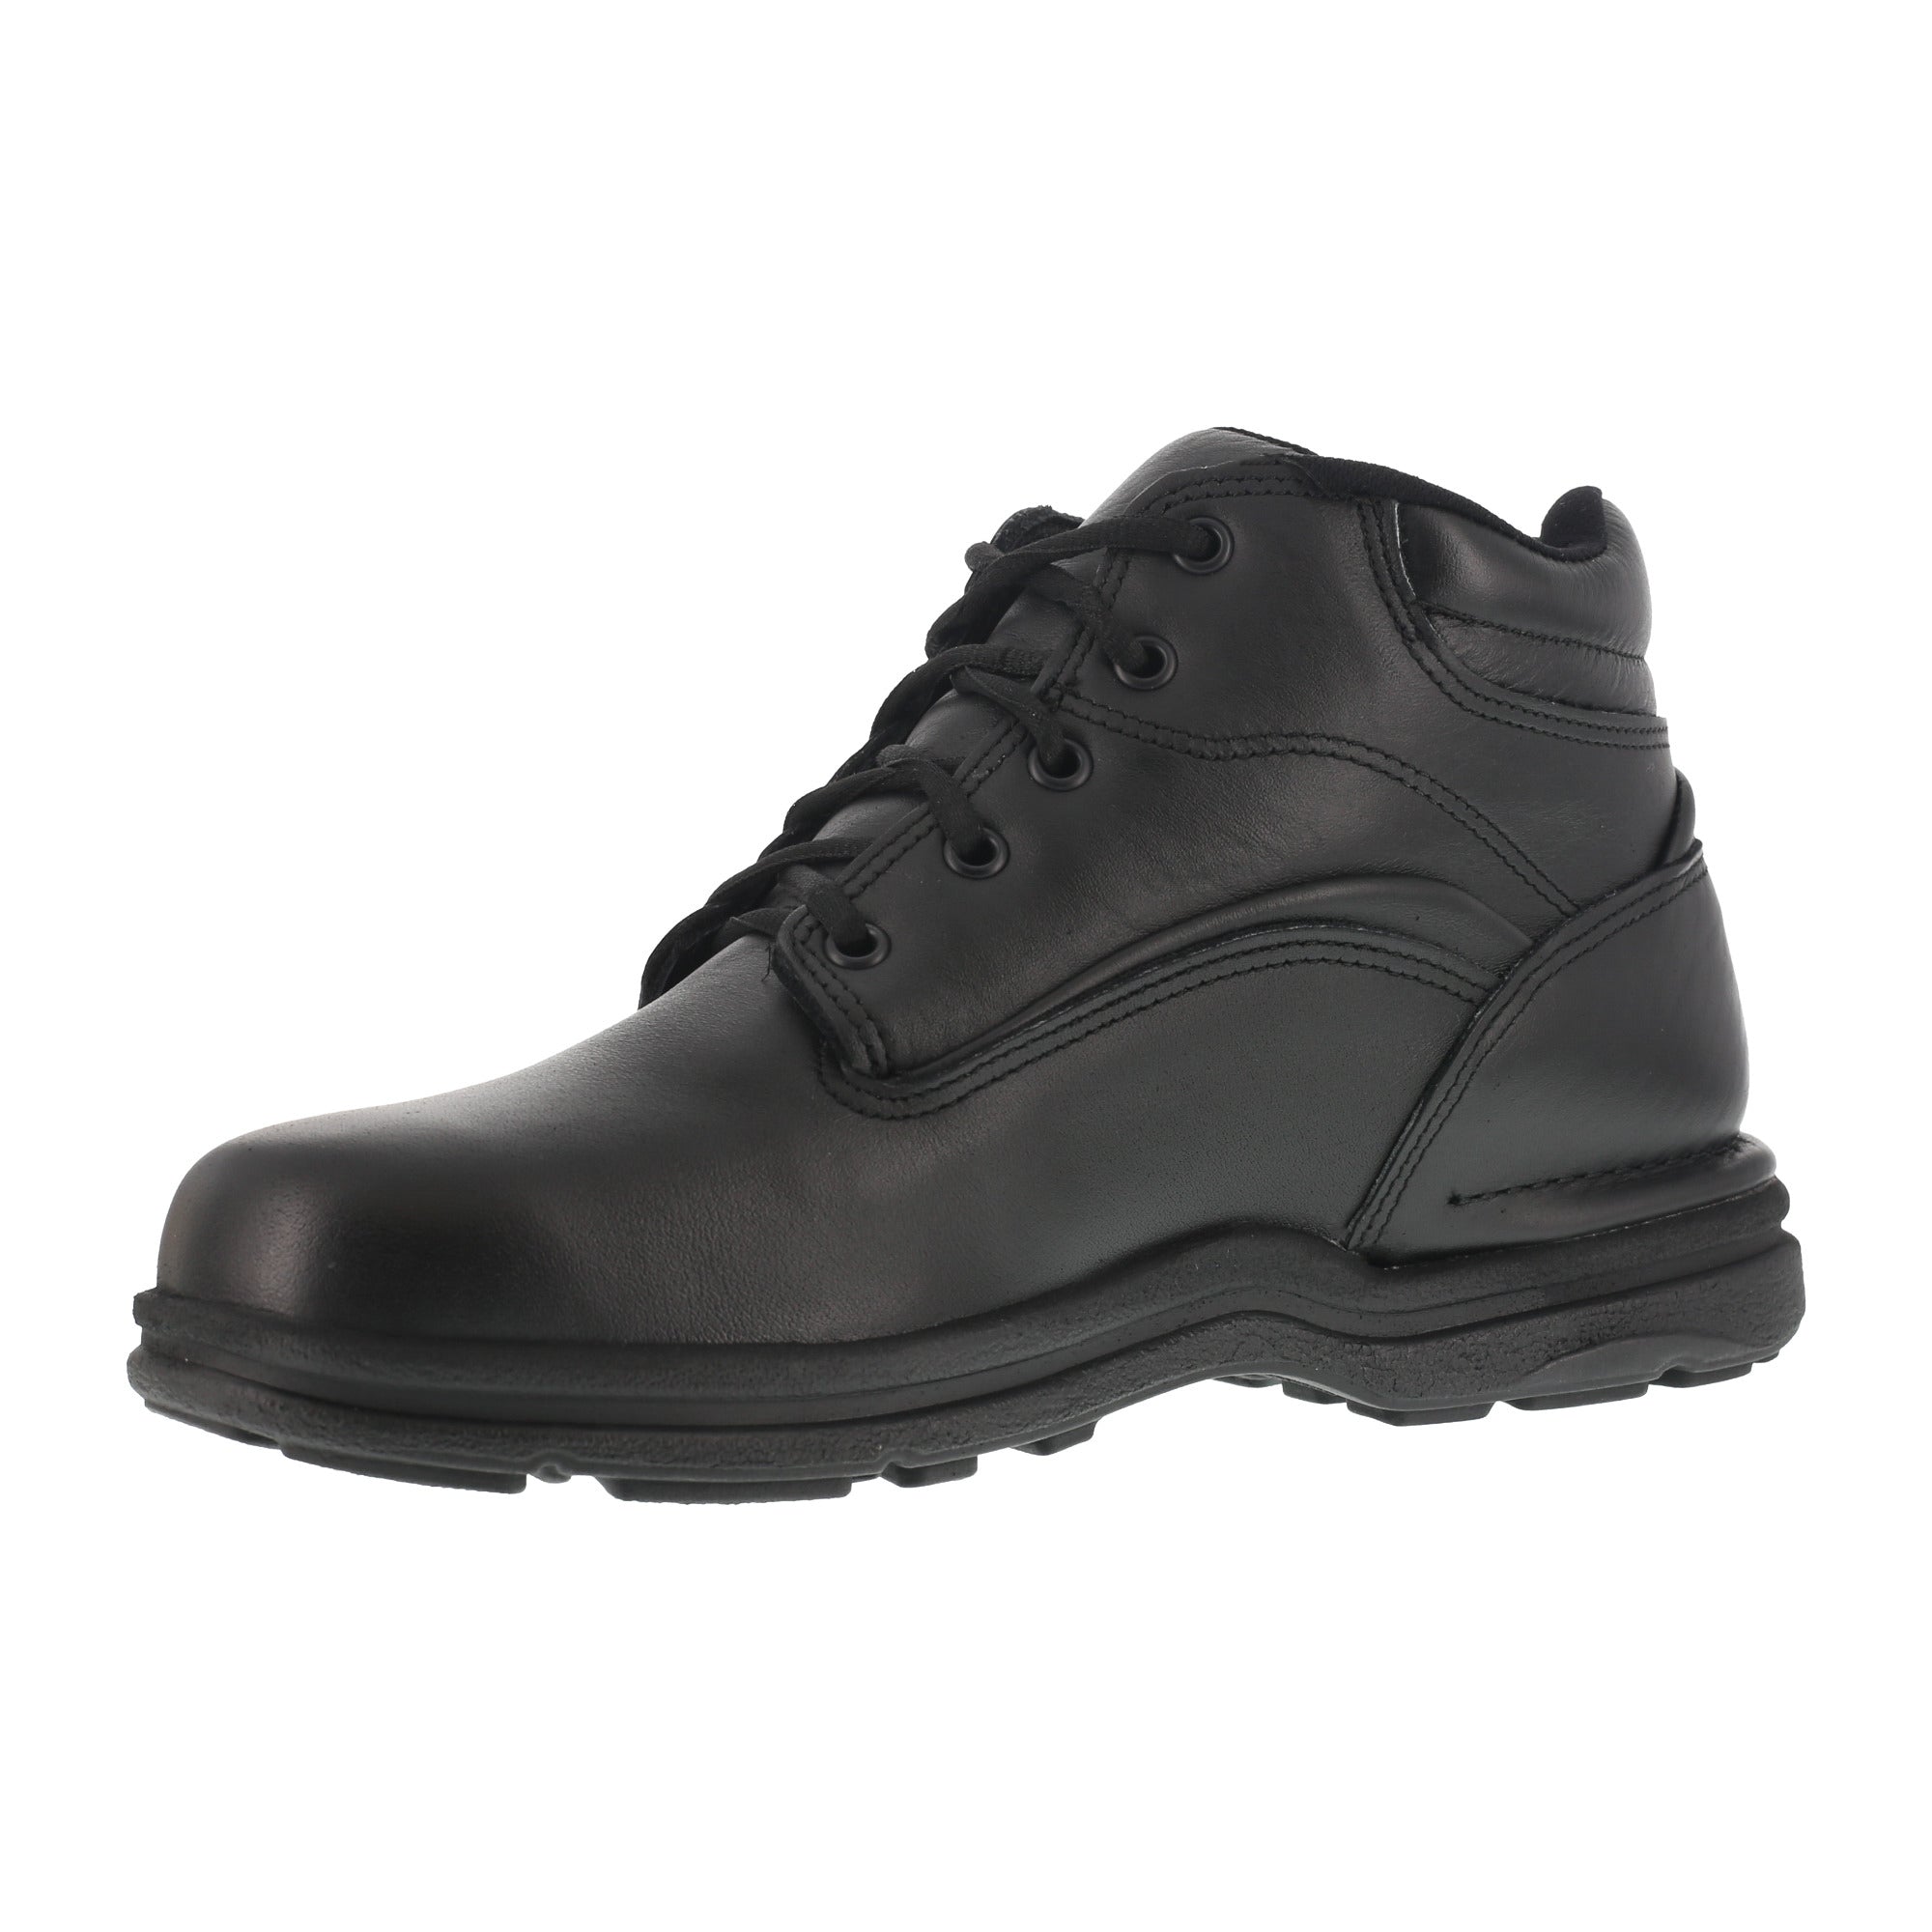 rockport black leather boots